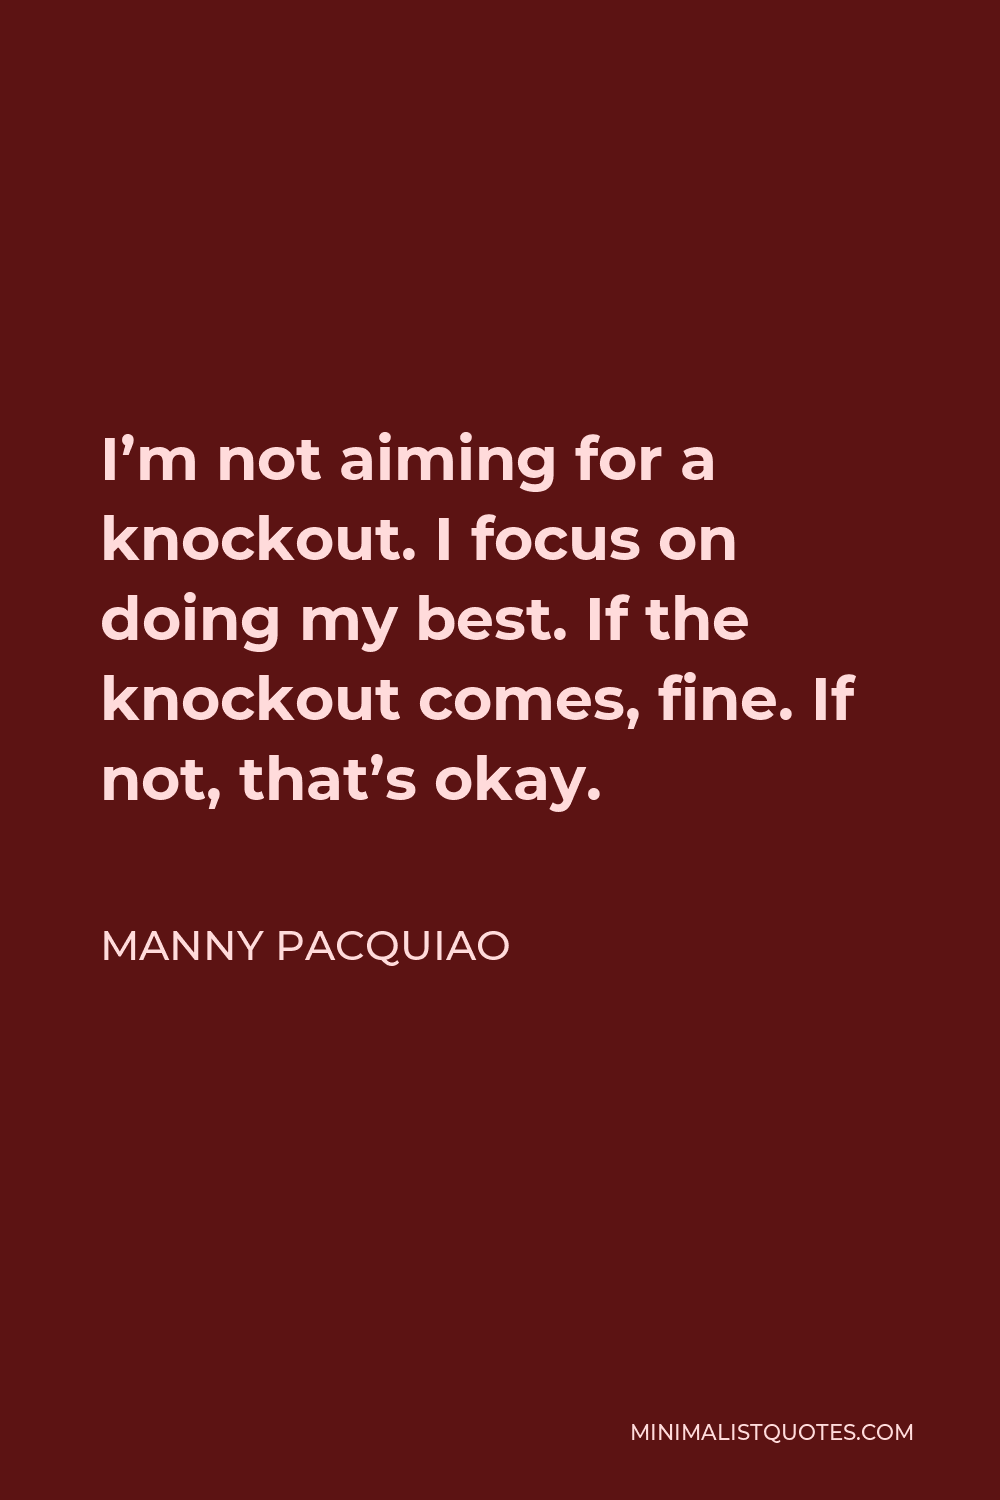 Manny Pacquiao Quote - I’m not aiming for a knockout. I focus on doing my best. If the knockout comes, fine. If not, that’s okay.